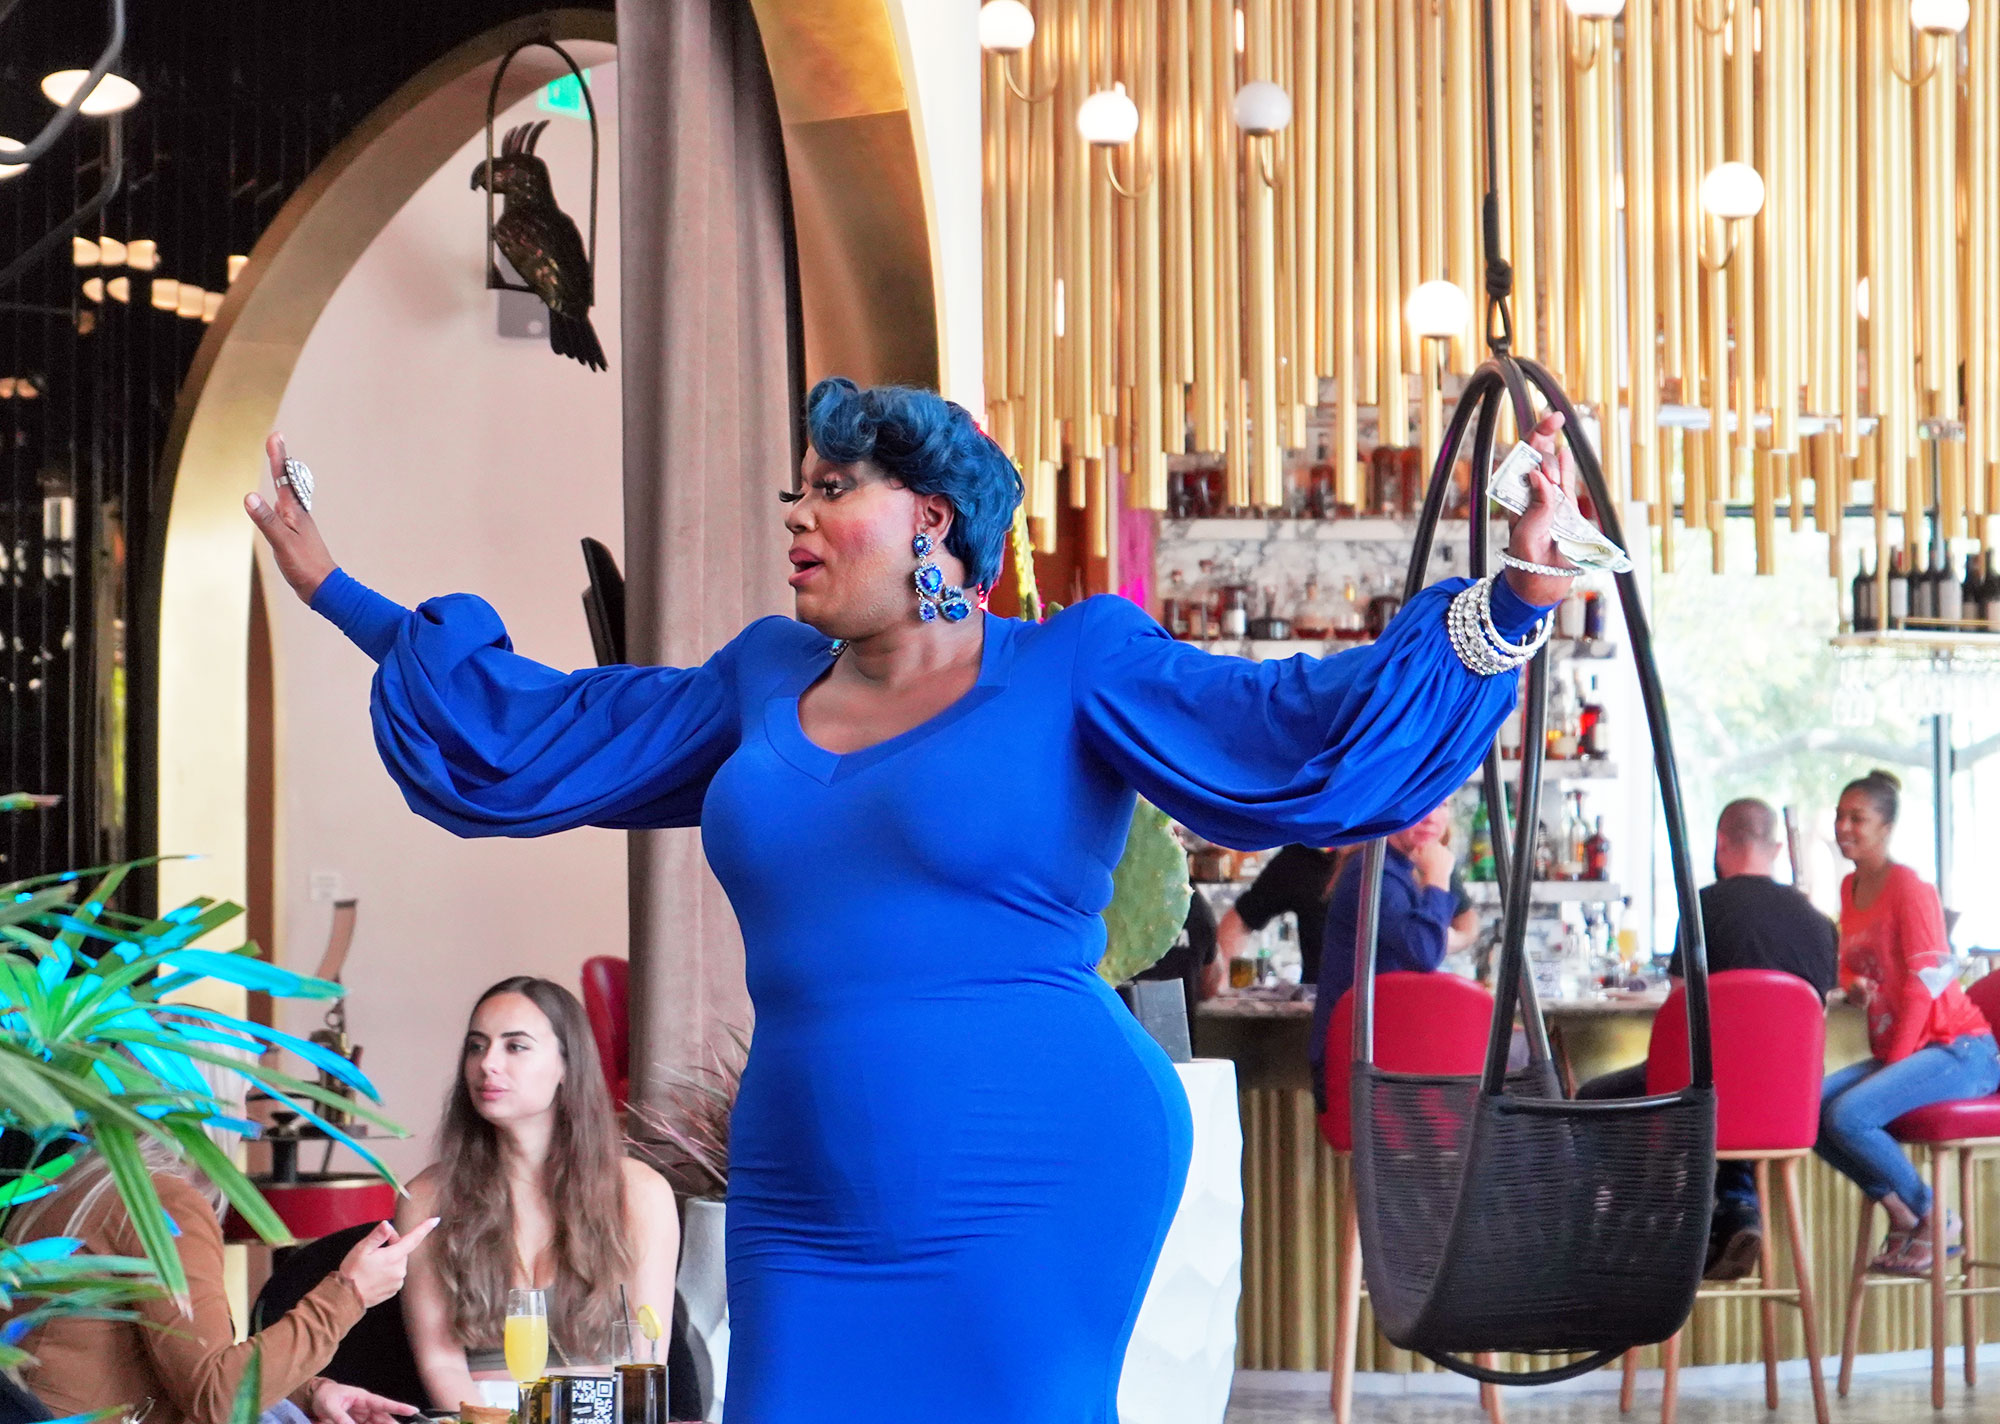 Onyx Anderson performing at drag brunch.